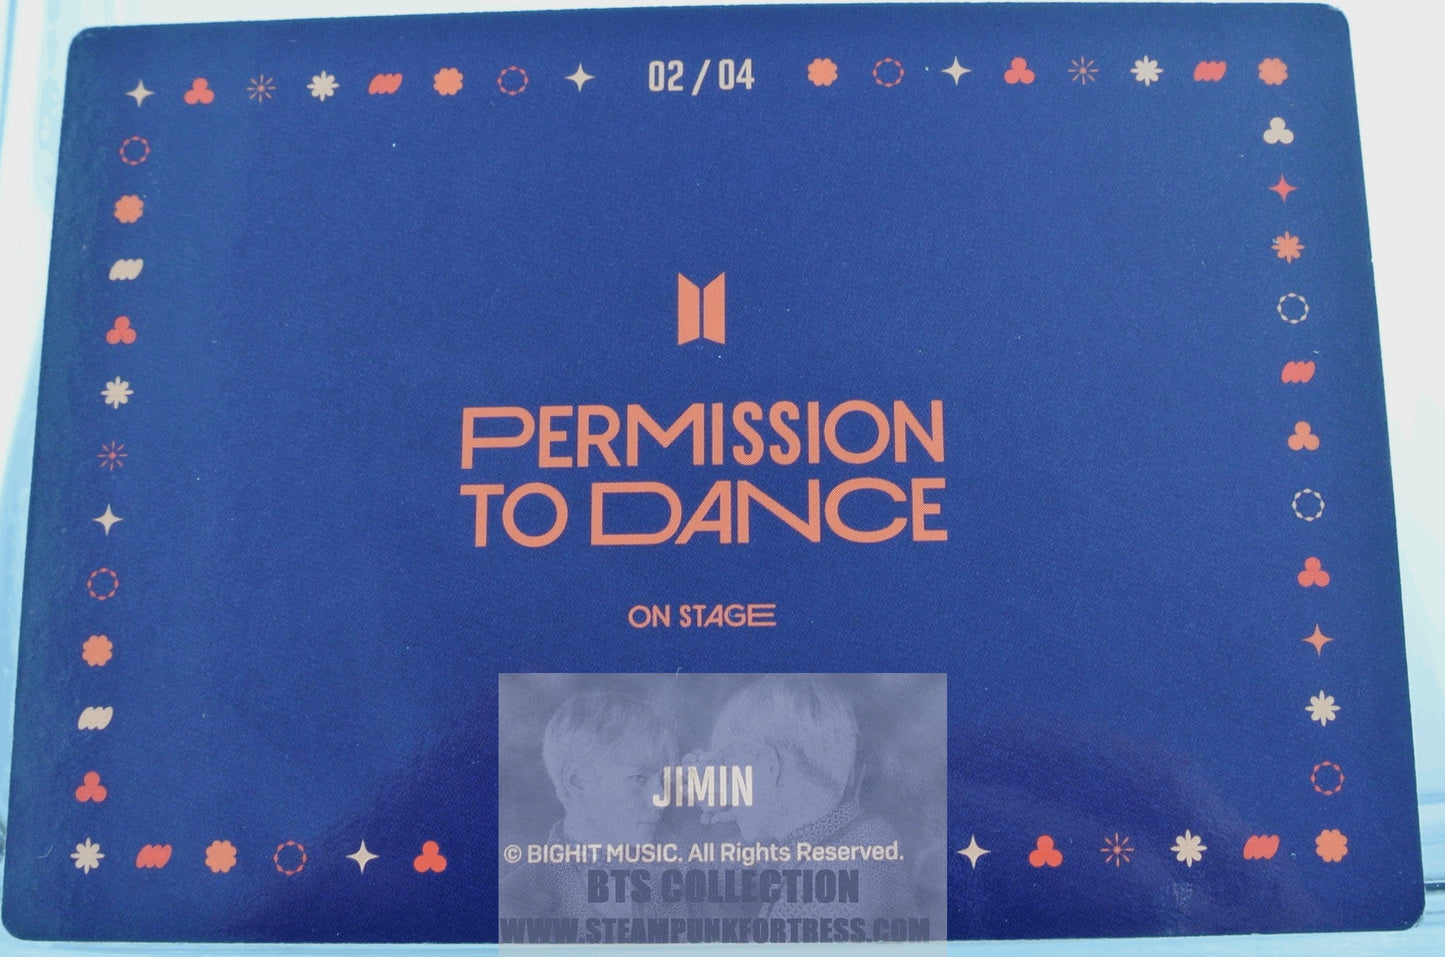 BTS JIMIN PARK JI-MIN 2022 PERMISSION TO DANCE ON STAGE SEOUL PTD #2 OF 4 PHOTOCARD PHOTO CARD NEW OFFICIAL MERCHANDISE